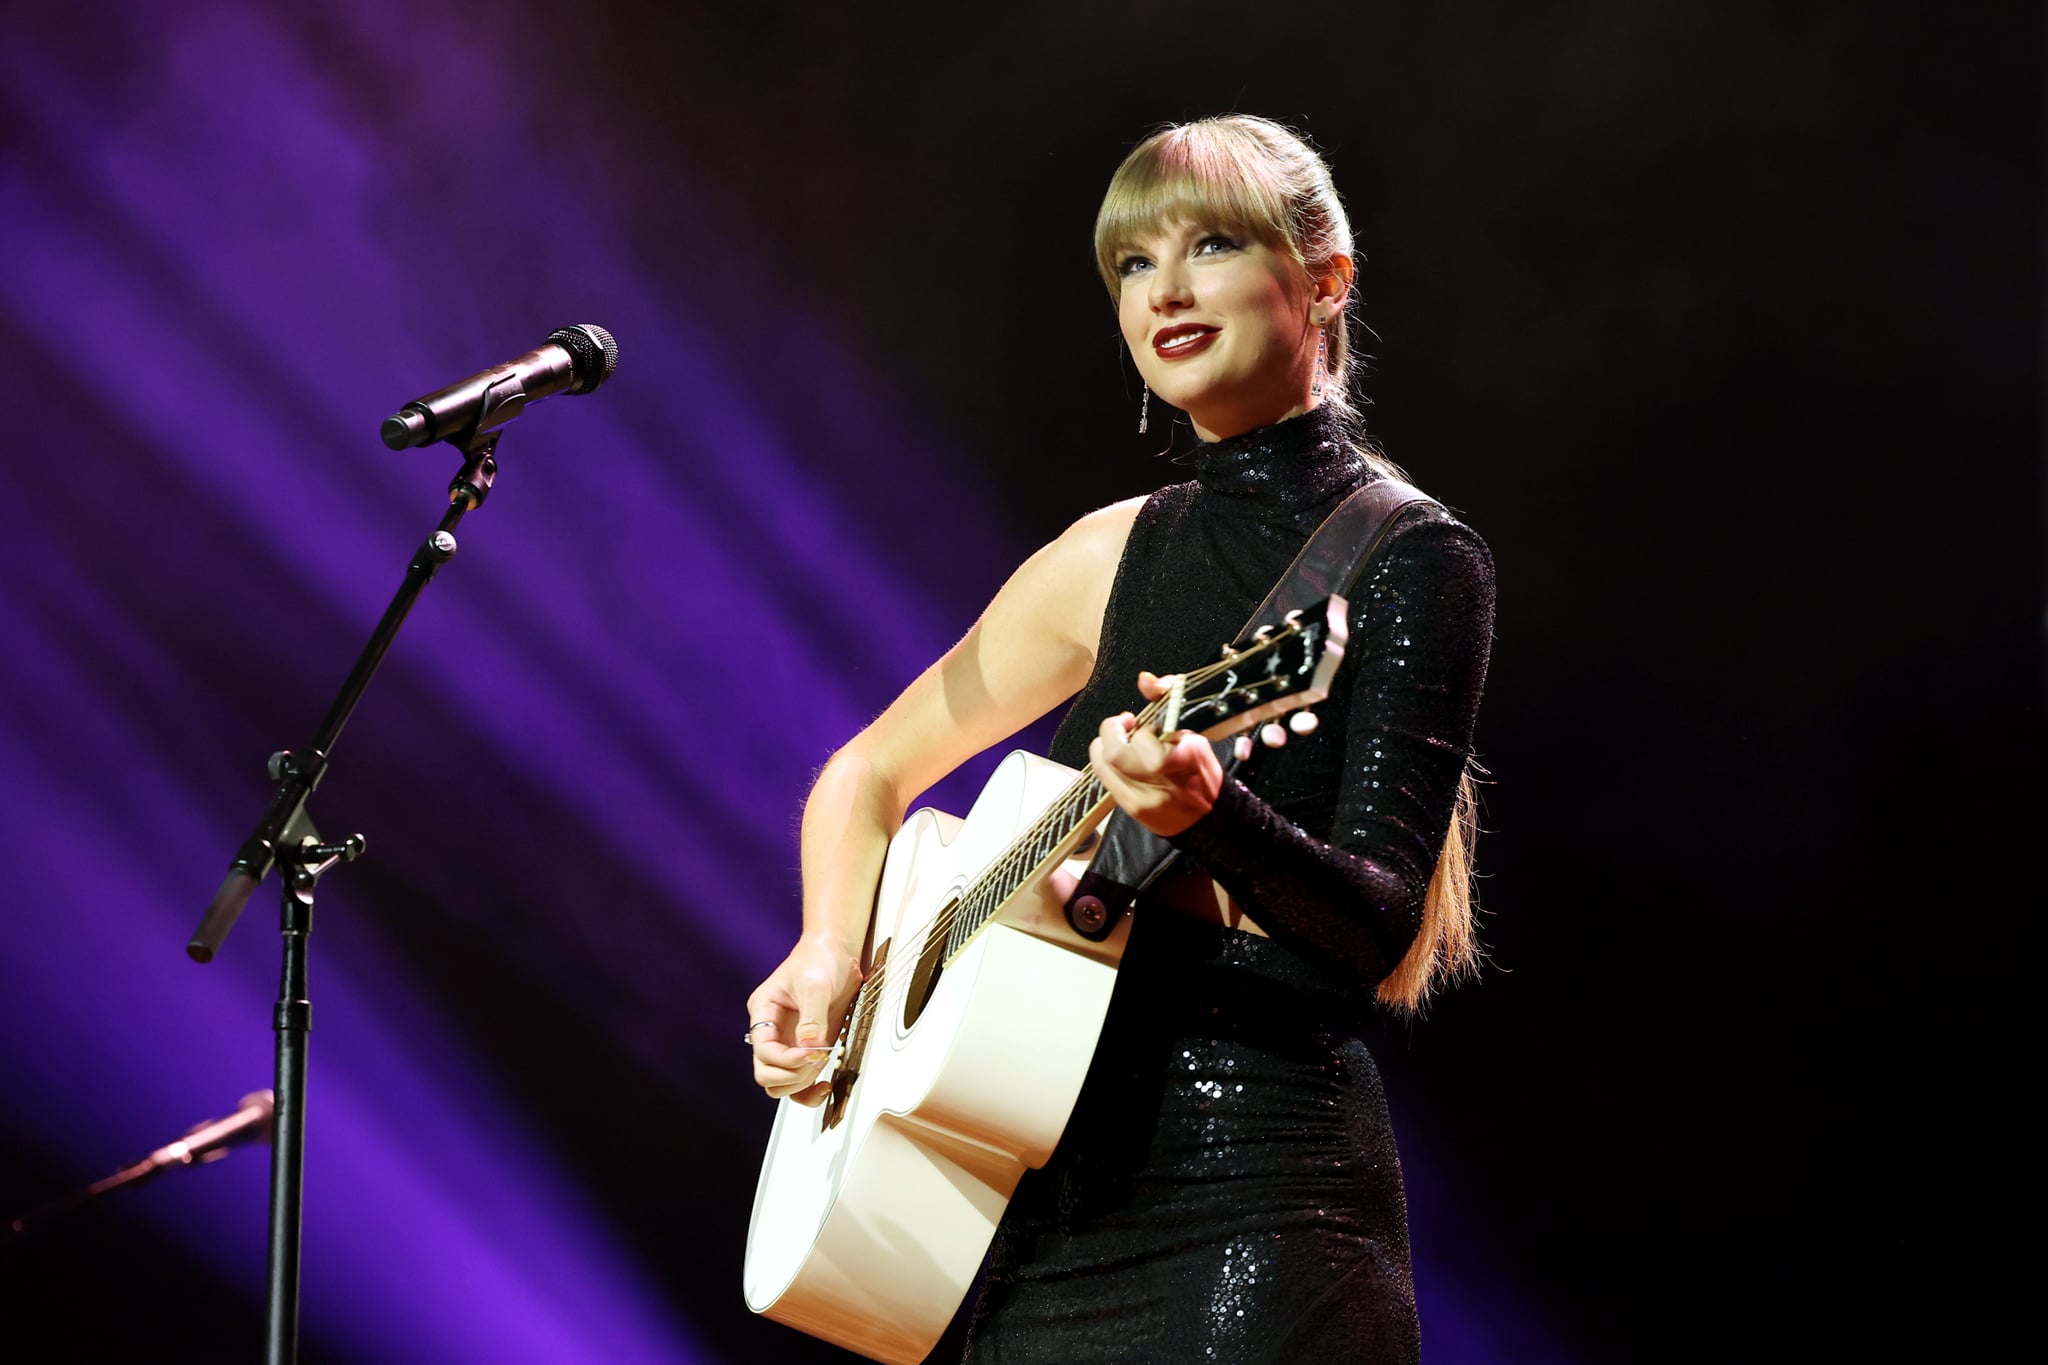 NASHVILLE, TENNESSEE - SEPTEMBER 20: NSAI Songwriter-Artist of the Decade honoree, Taylor Swift performs onstage during NSAI 2022 Nashville Songwriter Awards at Ryman Auditorium on September 20, 2022 in Nashville, Tennessee. (Photo by Terry Wyatt/Getty Images)